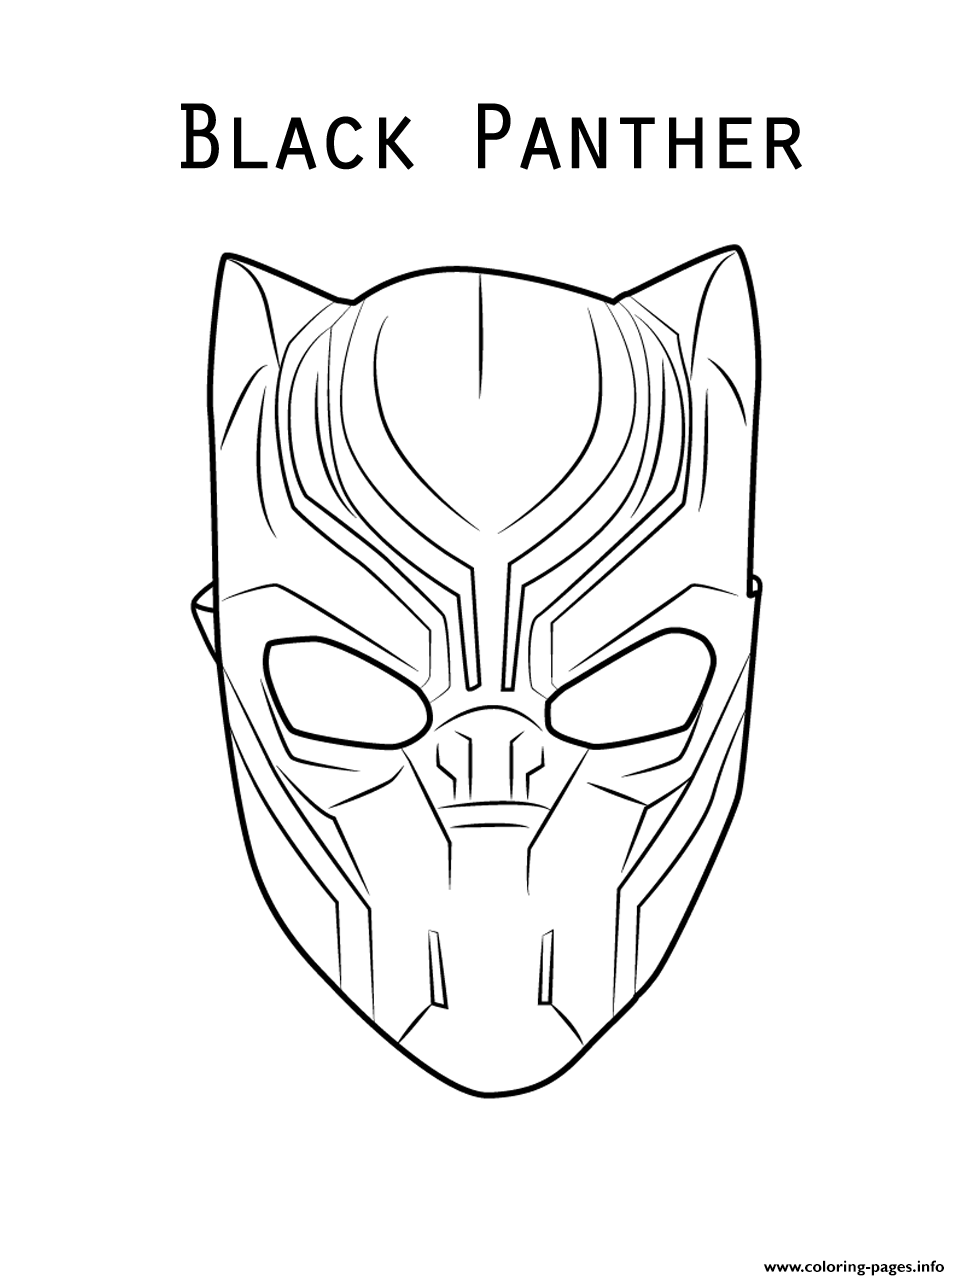 black panther animal coloring pages